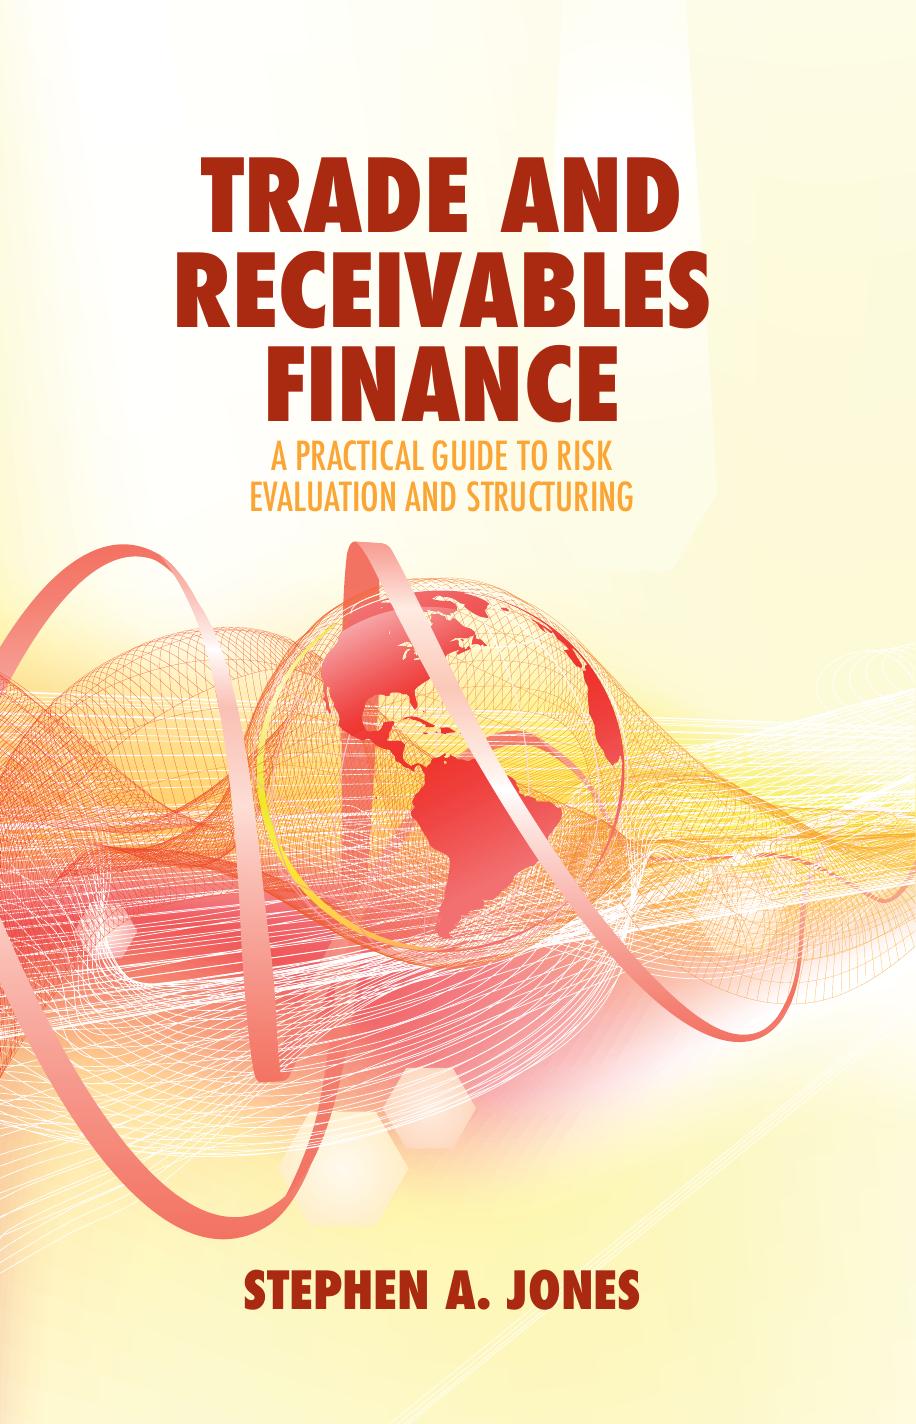 Trade and Receivables Finance  A Practical Guide to Risk Evaluation and Structuring 2018.pdf